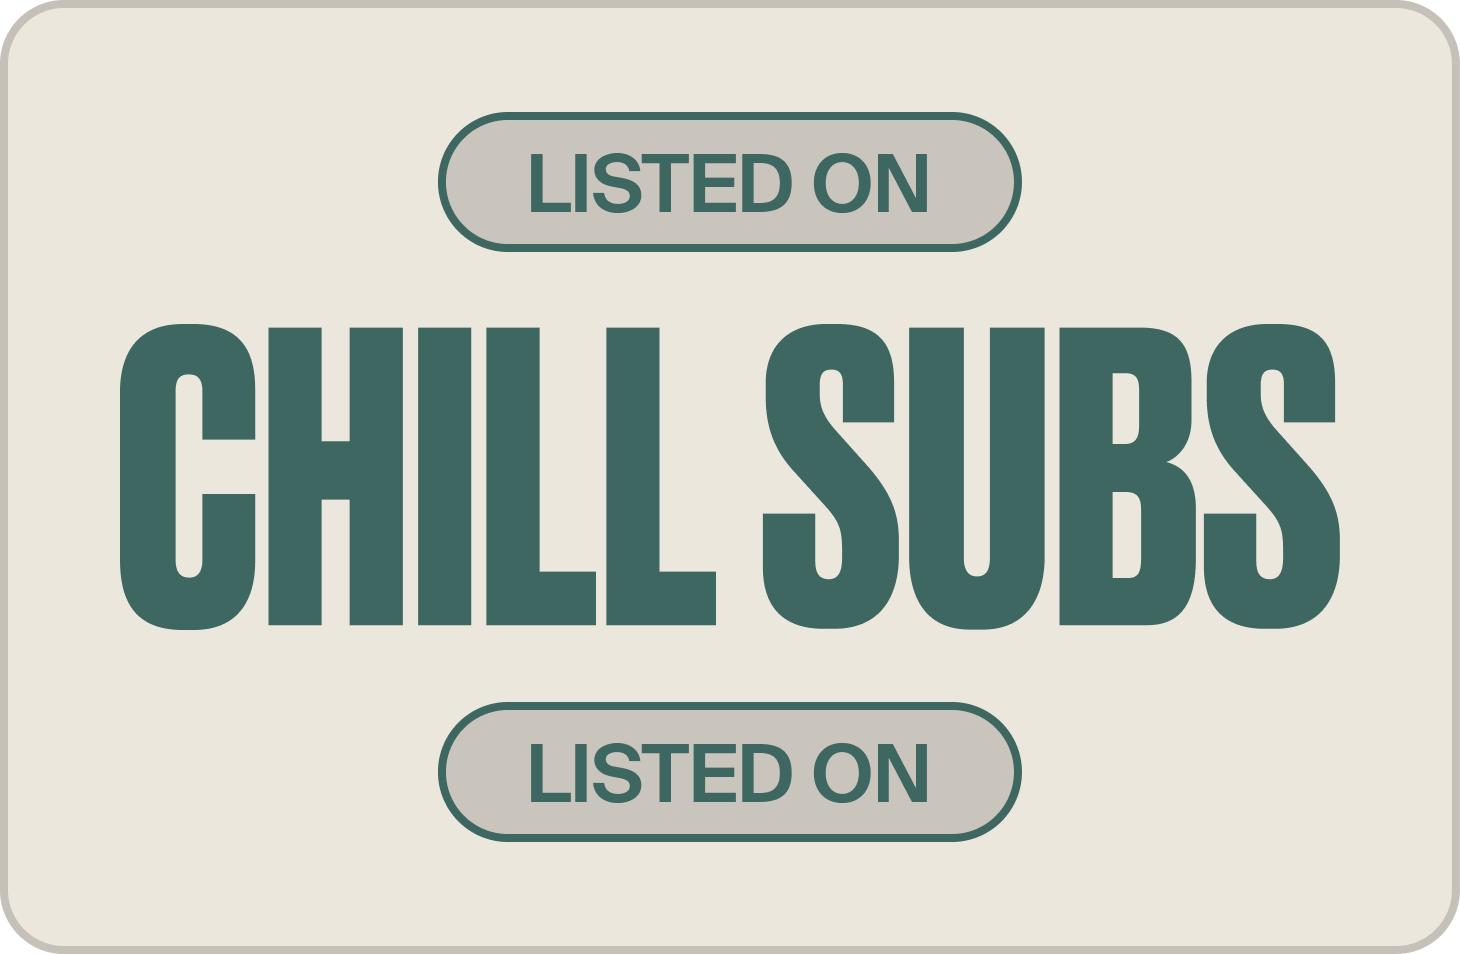 Chill subs listing sticker